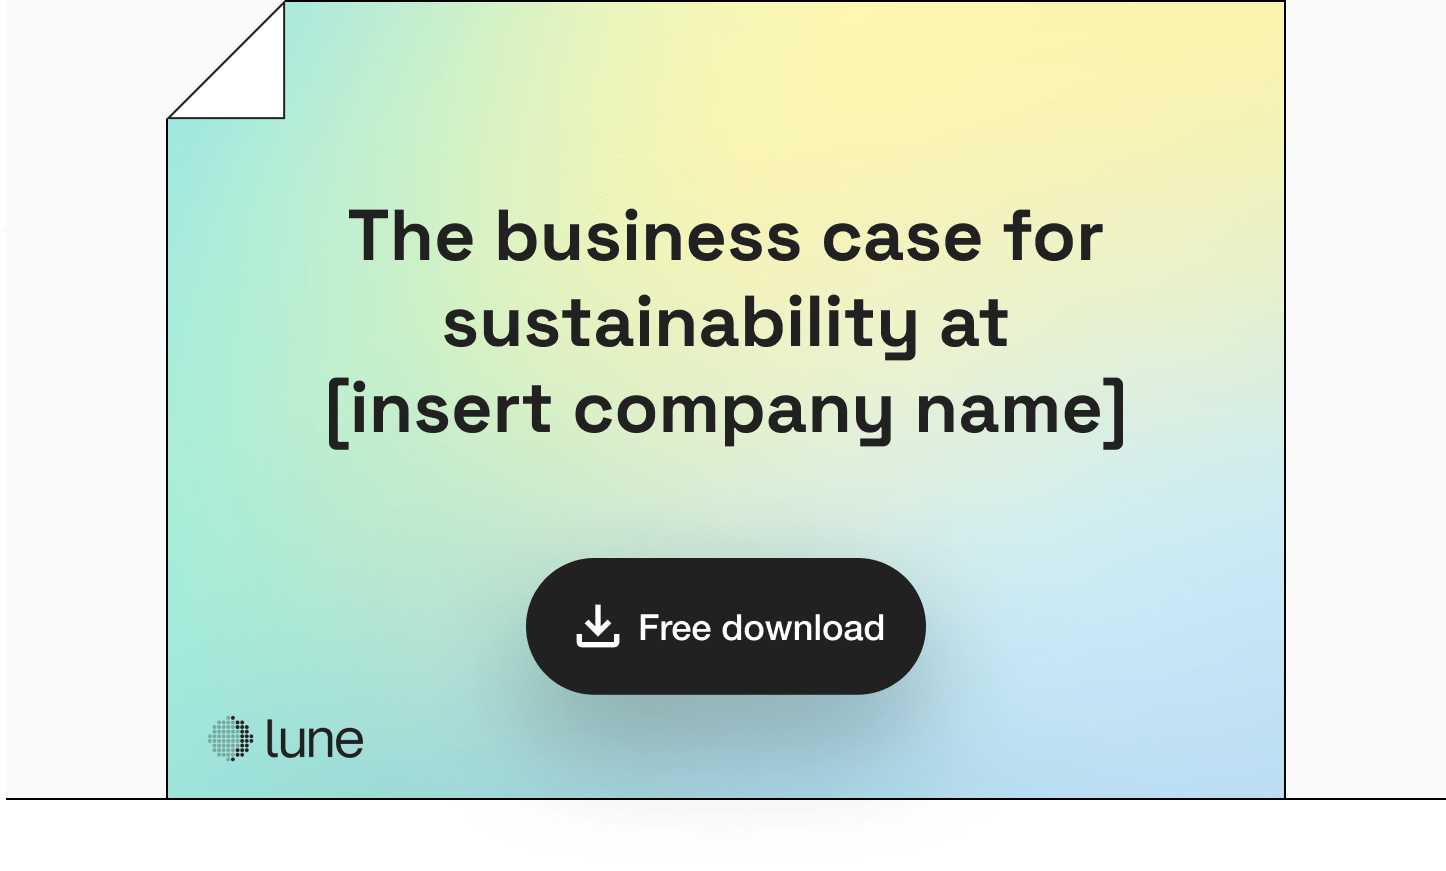 Free download: the business case for sustainability at [insert company name]